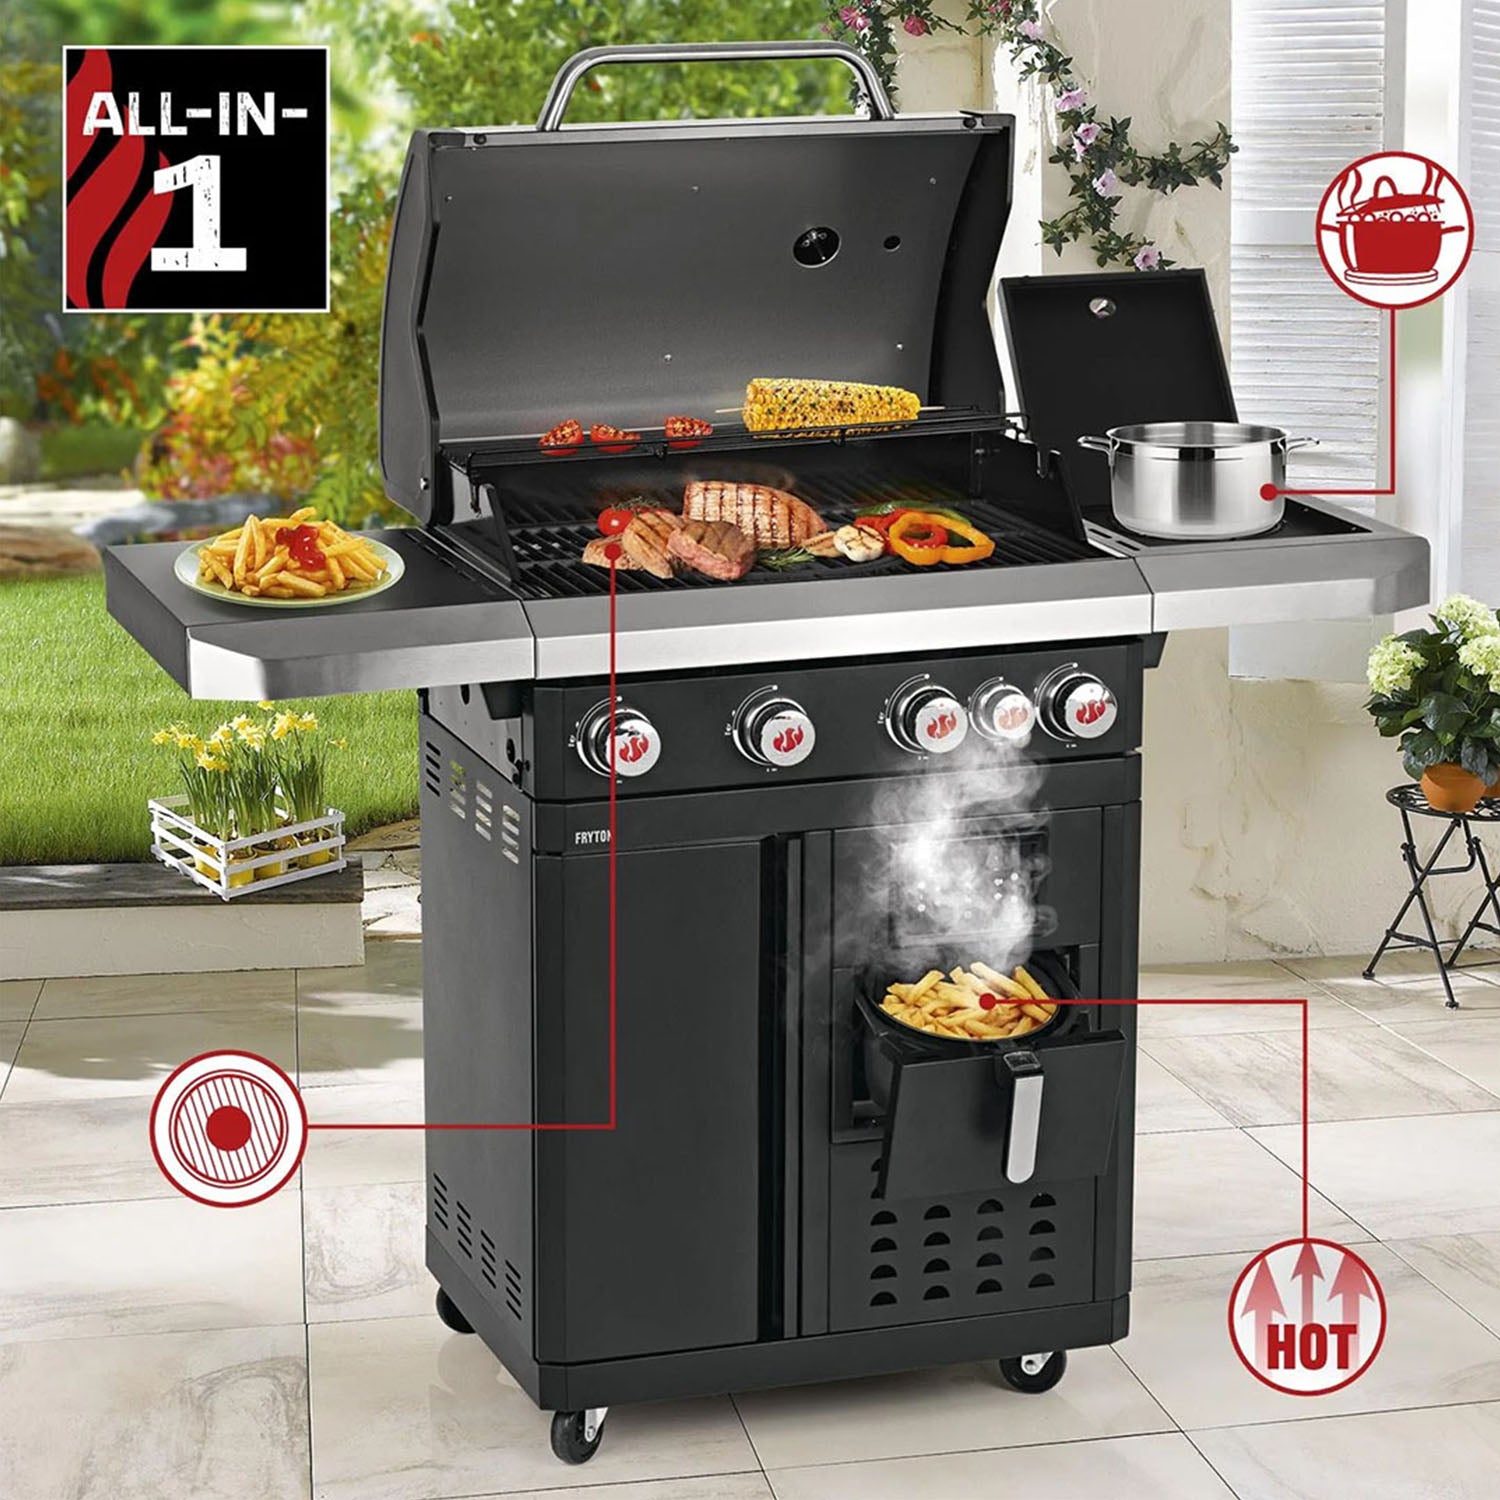 Fryton cooK 4.1 Gas BBQ with 3.5L air fryer - Black